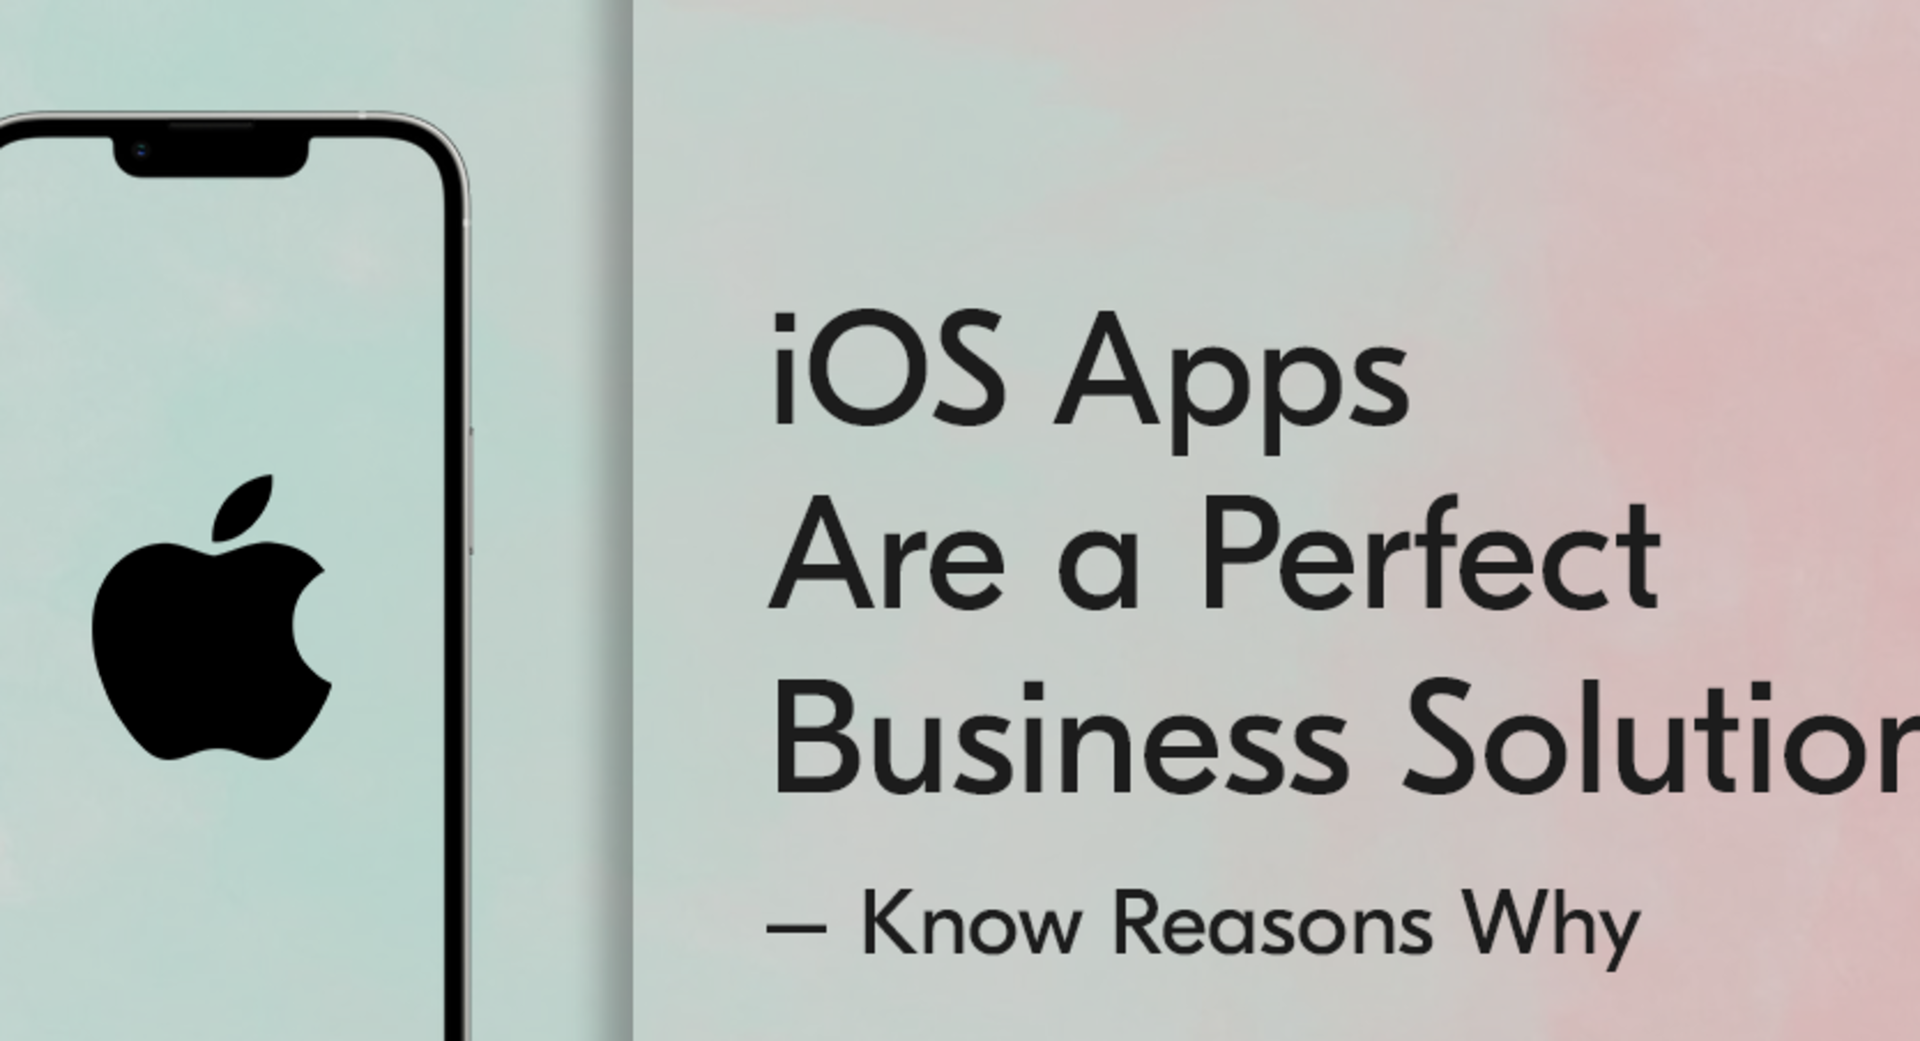 iOS Apps Are a Perfect Business Solution – Know Reasons Why